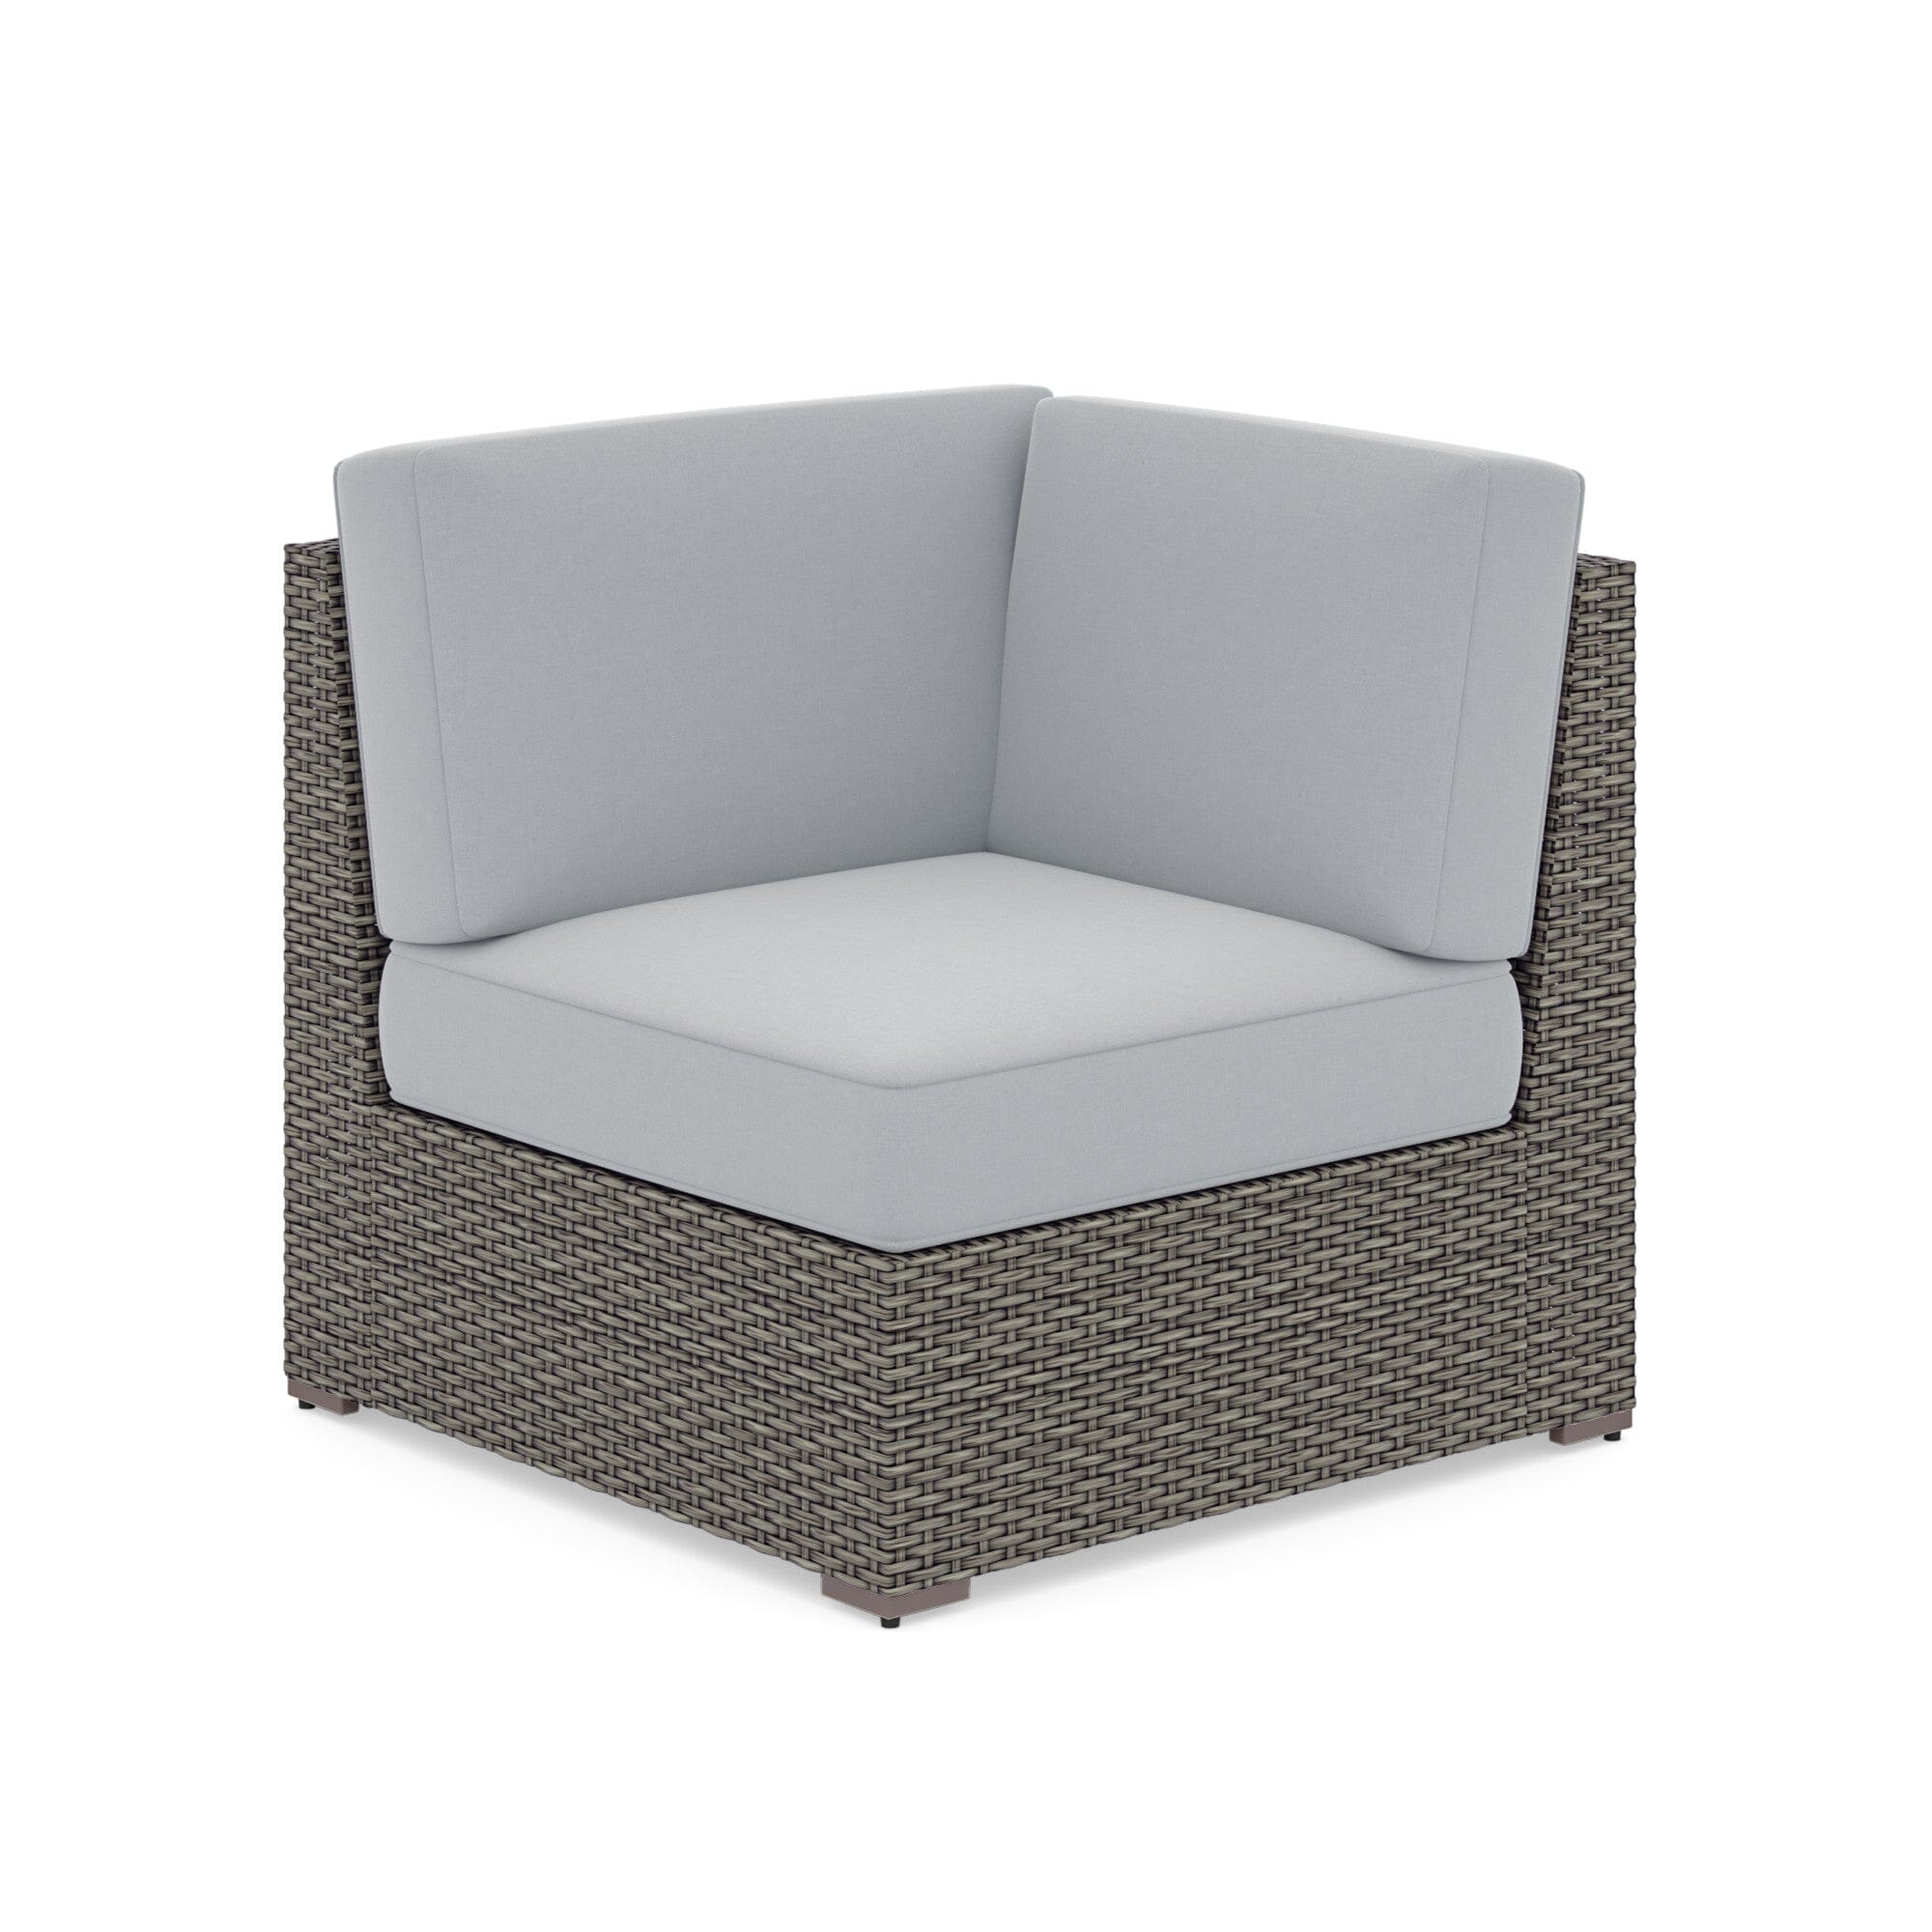 Modern & Contemporary Outdoor Chair Pair and Coffee Table By Boca Raton Outdoor Seating Boca Raton